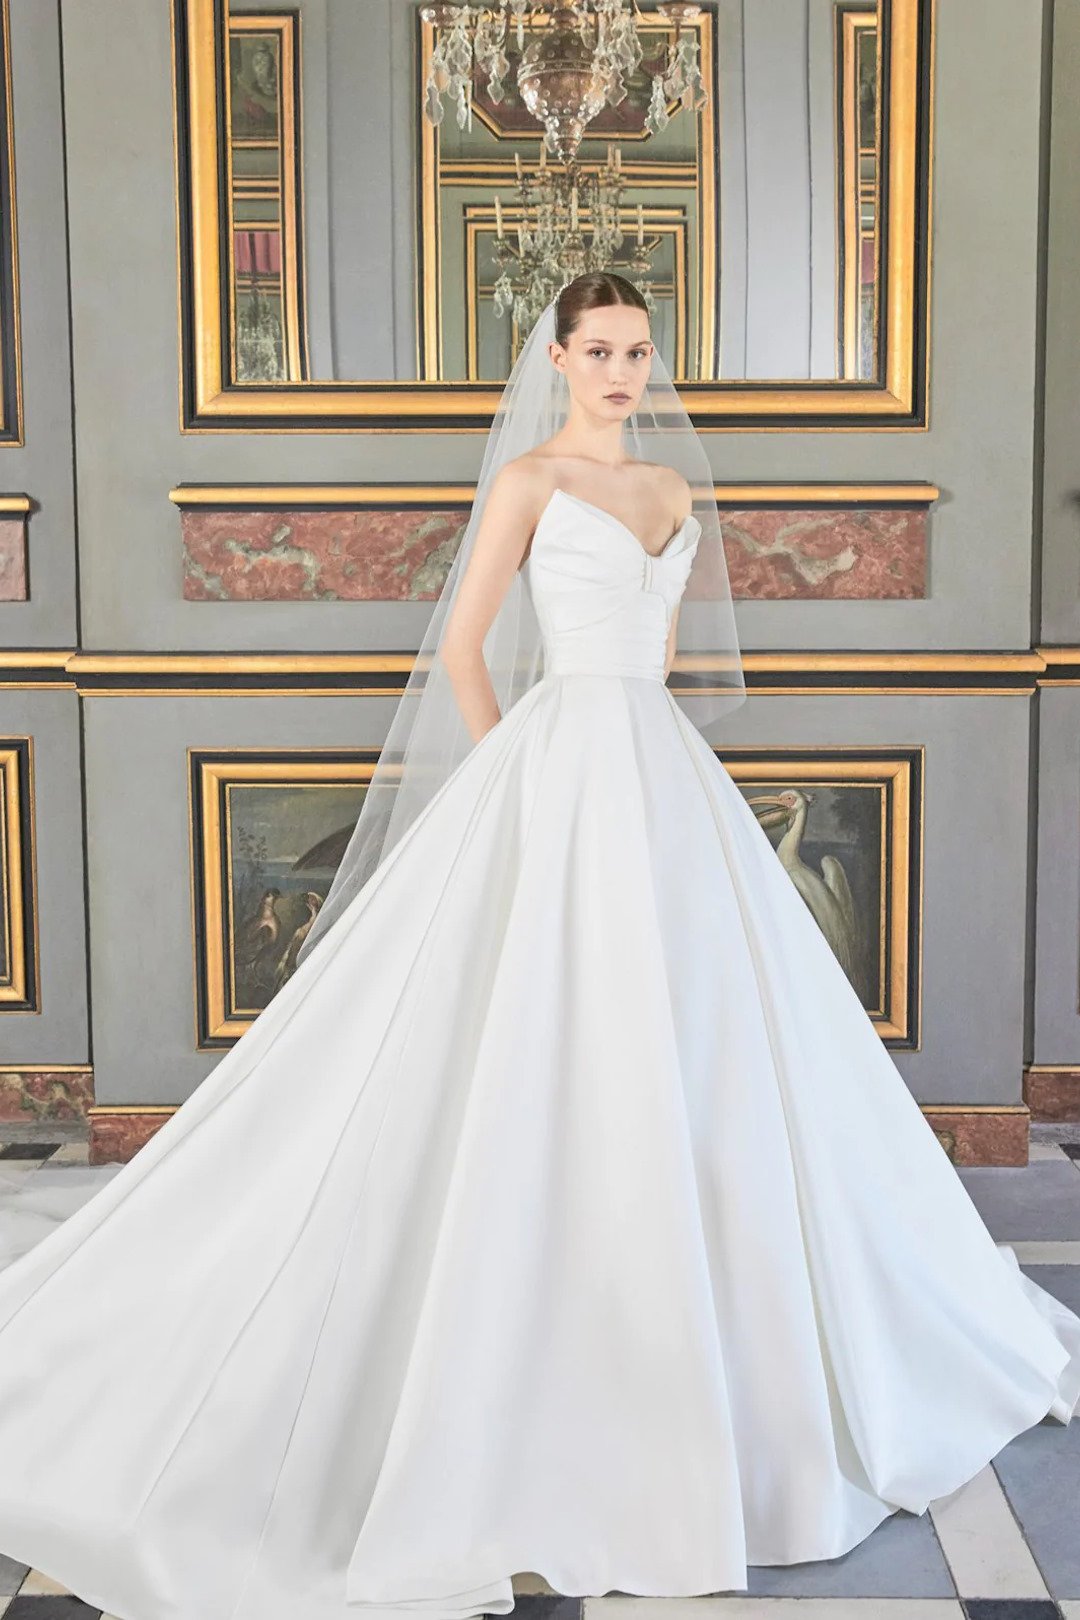 Wedding Dress Designer Galia Lahav Shares Advice to Find the Perfect Gown